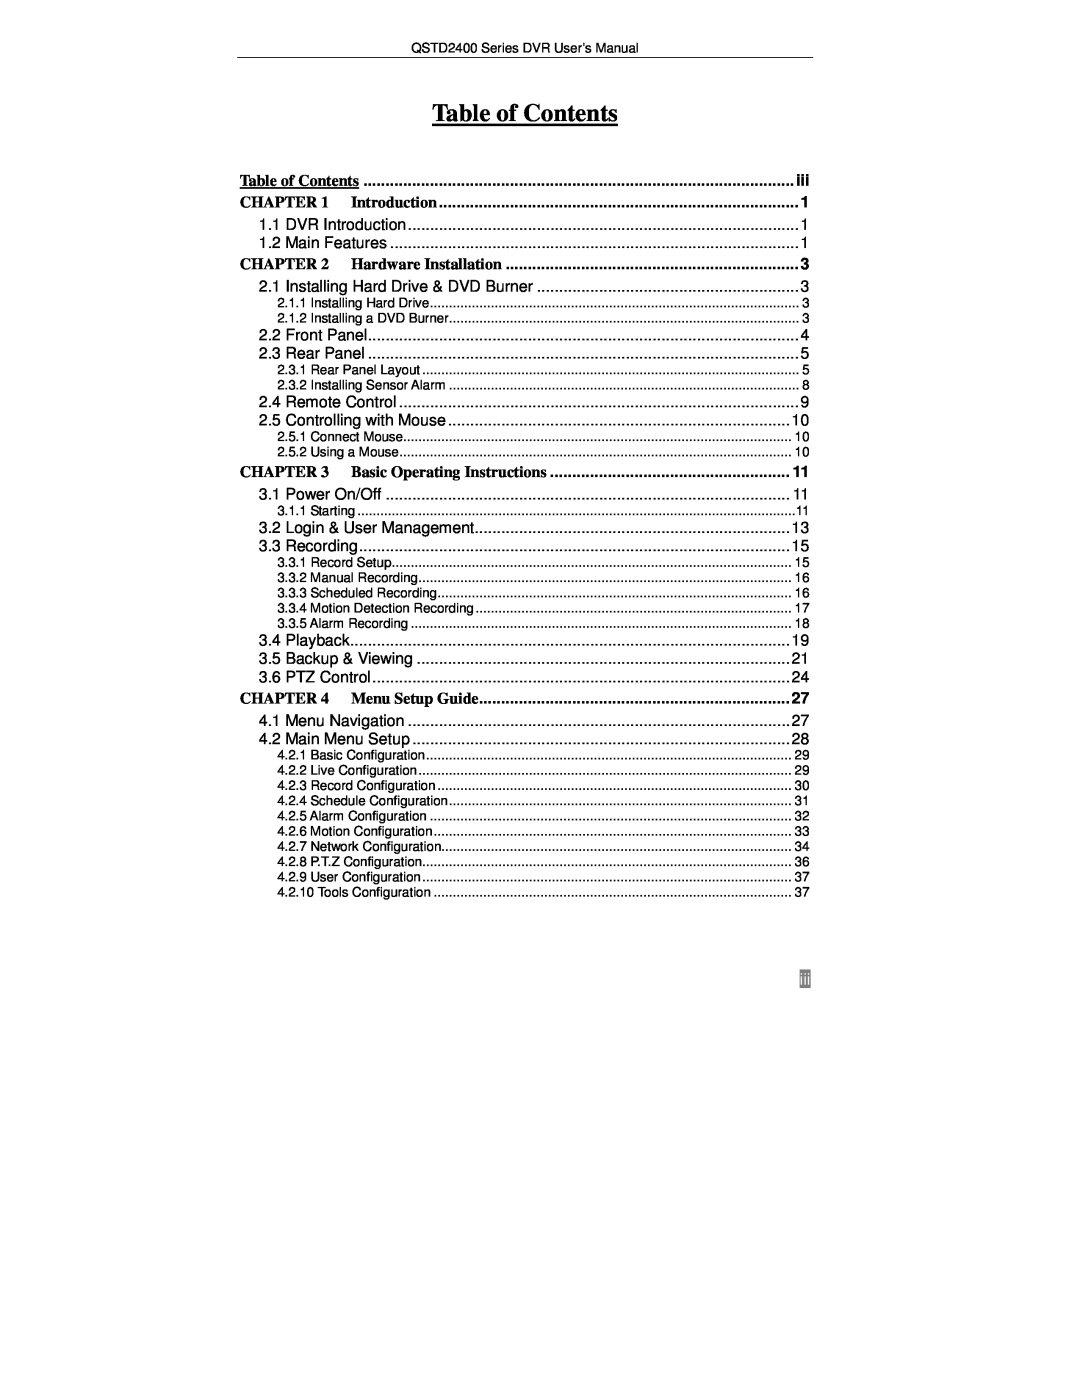 Q-See QSTD2416, QSTD2408, QSTD2404 user manual Table of Contents, Chapter 